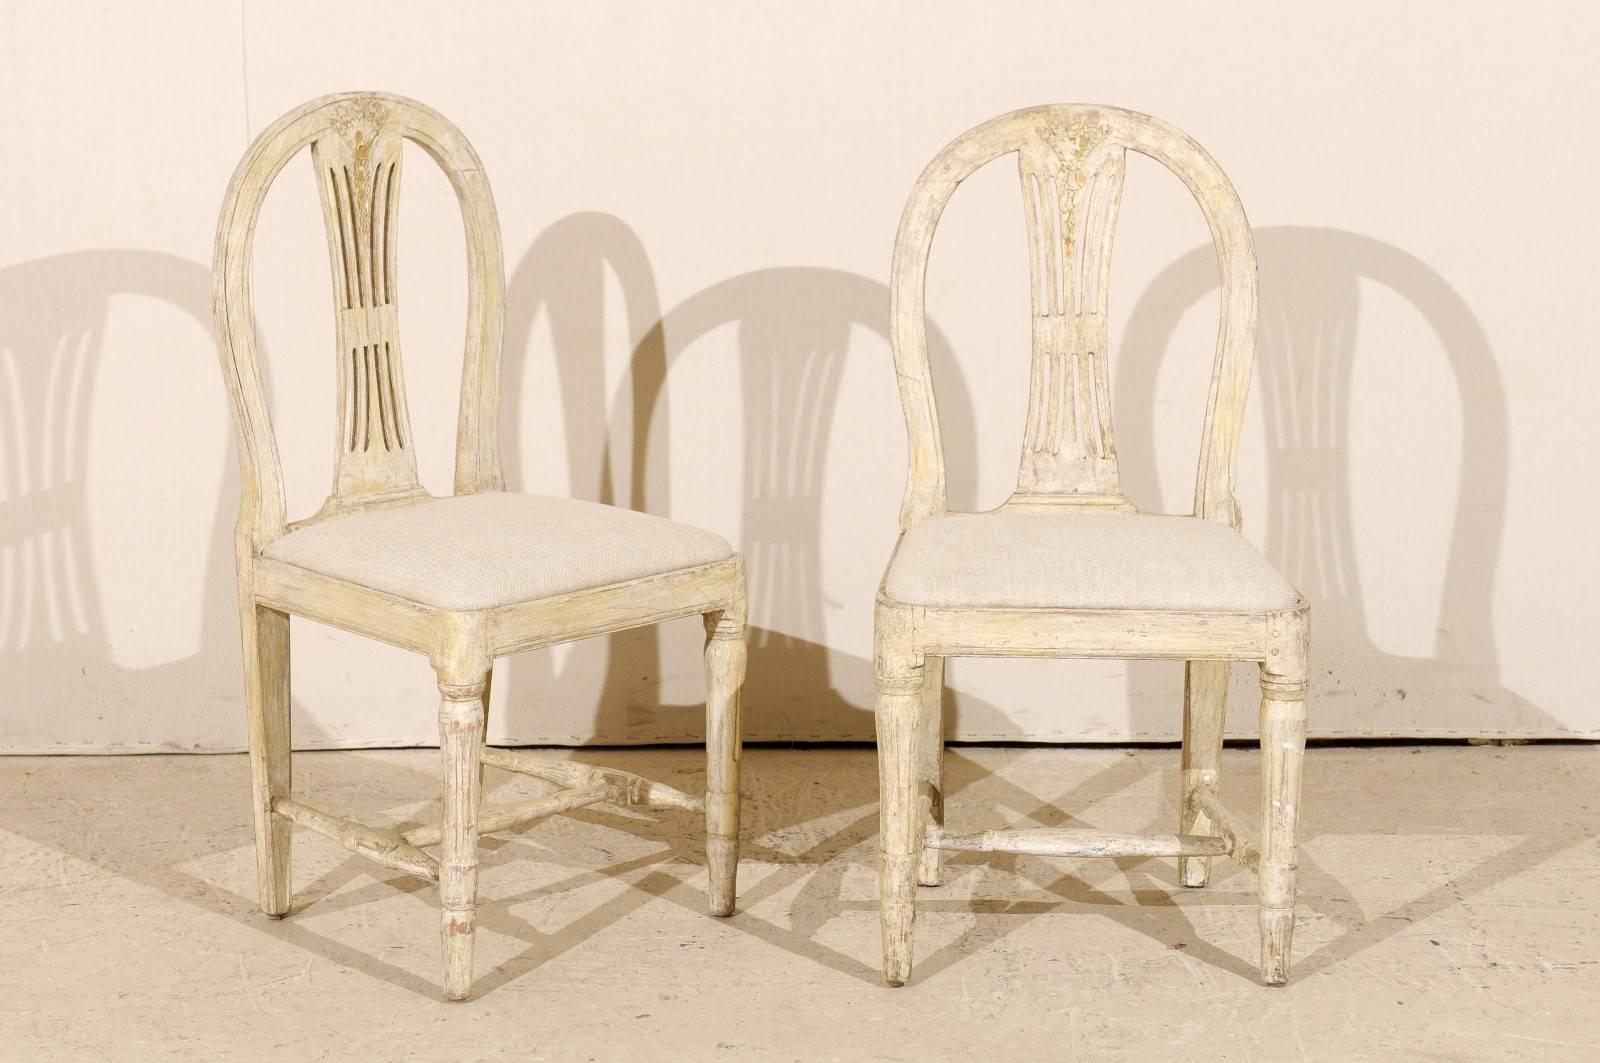 A pair of Swedish Provincial Gustavian wheat back side chairs. These Swedish chairs from the early 19th century have been scraped to their original color and feature round backs with a nicely carved top rail, fluted legs and a cross stretcher. The